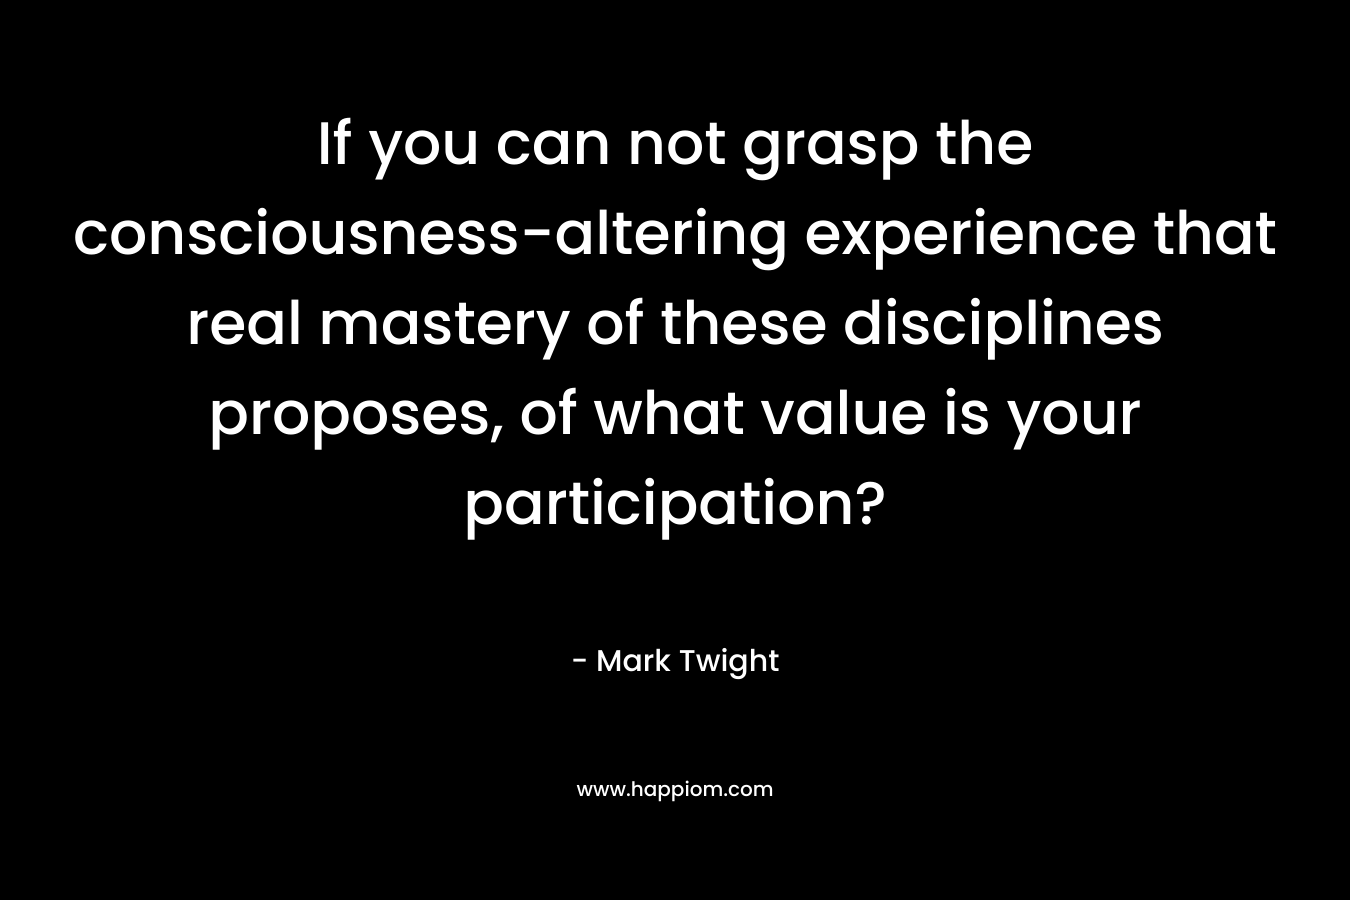 If you can not grasp the consciousness-altering experience that real mastery of these disciplines proposes, of what value is your participation? – Mark Twight